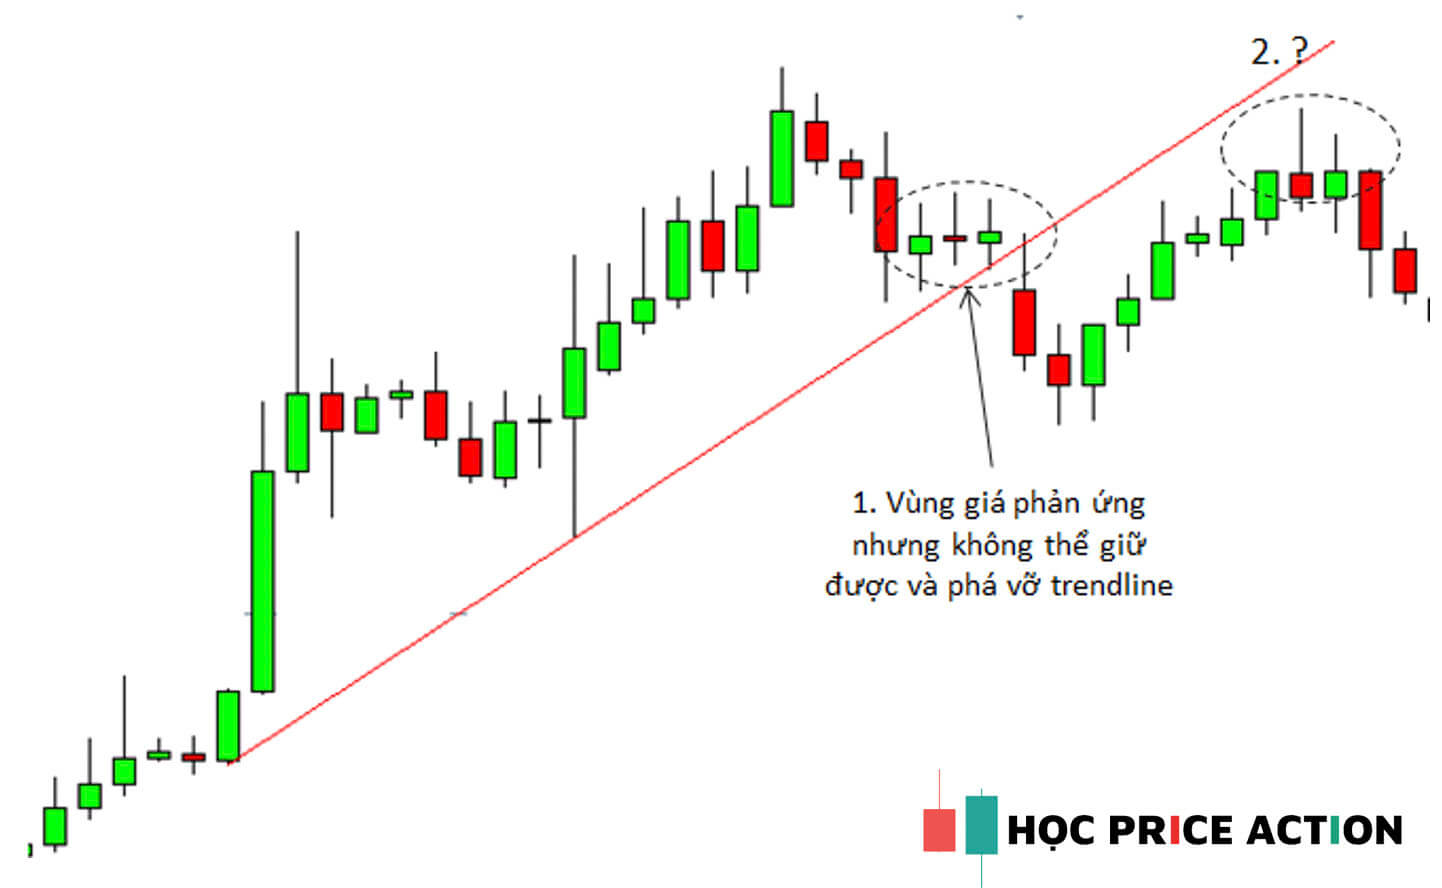 ap-dung-trendline-vao-phan-tich-giao-dich-voi-price-action-20